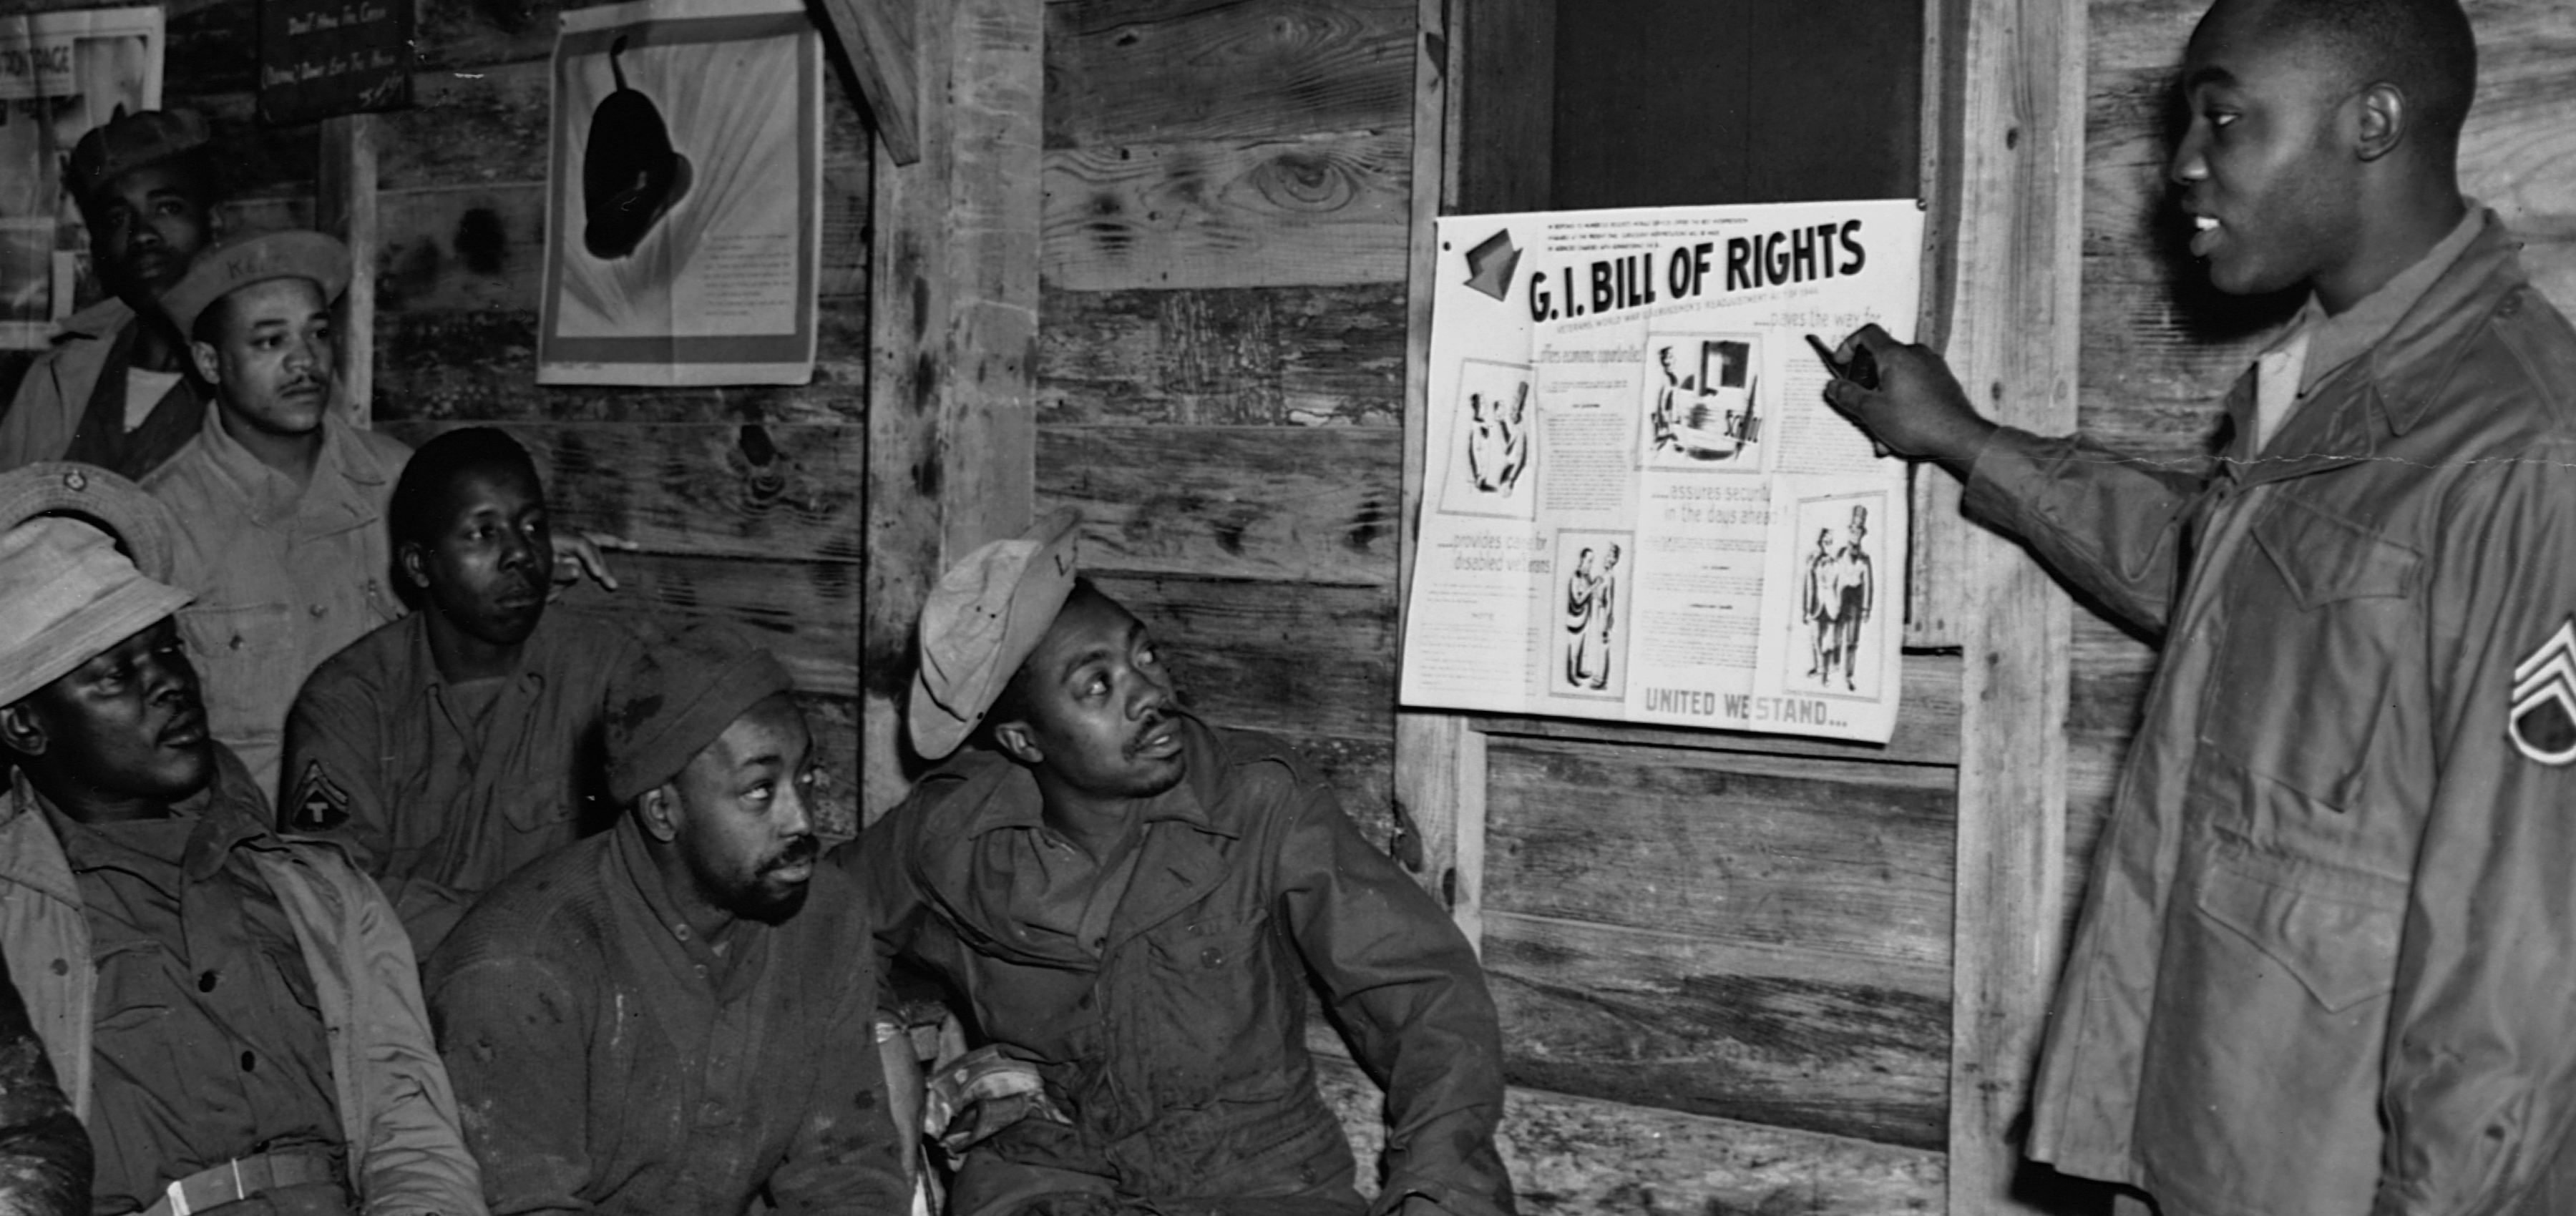 Black soldiers discuss the GI Bill of Rights